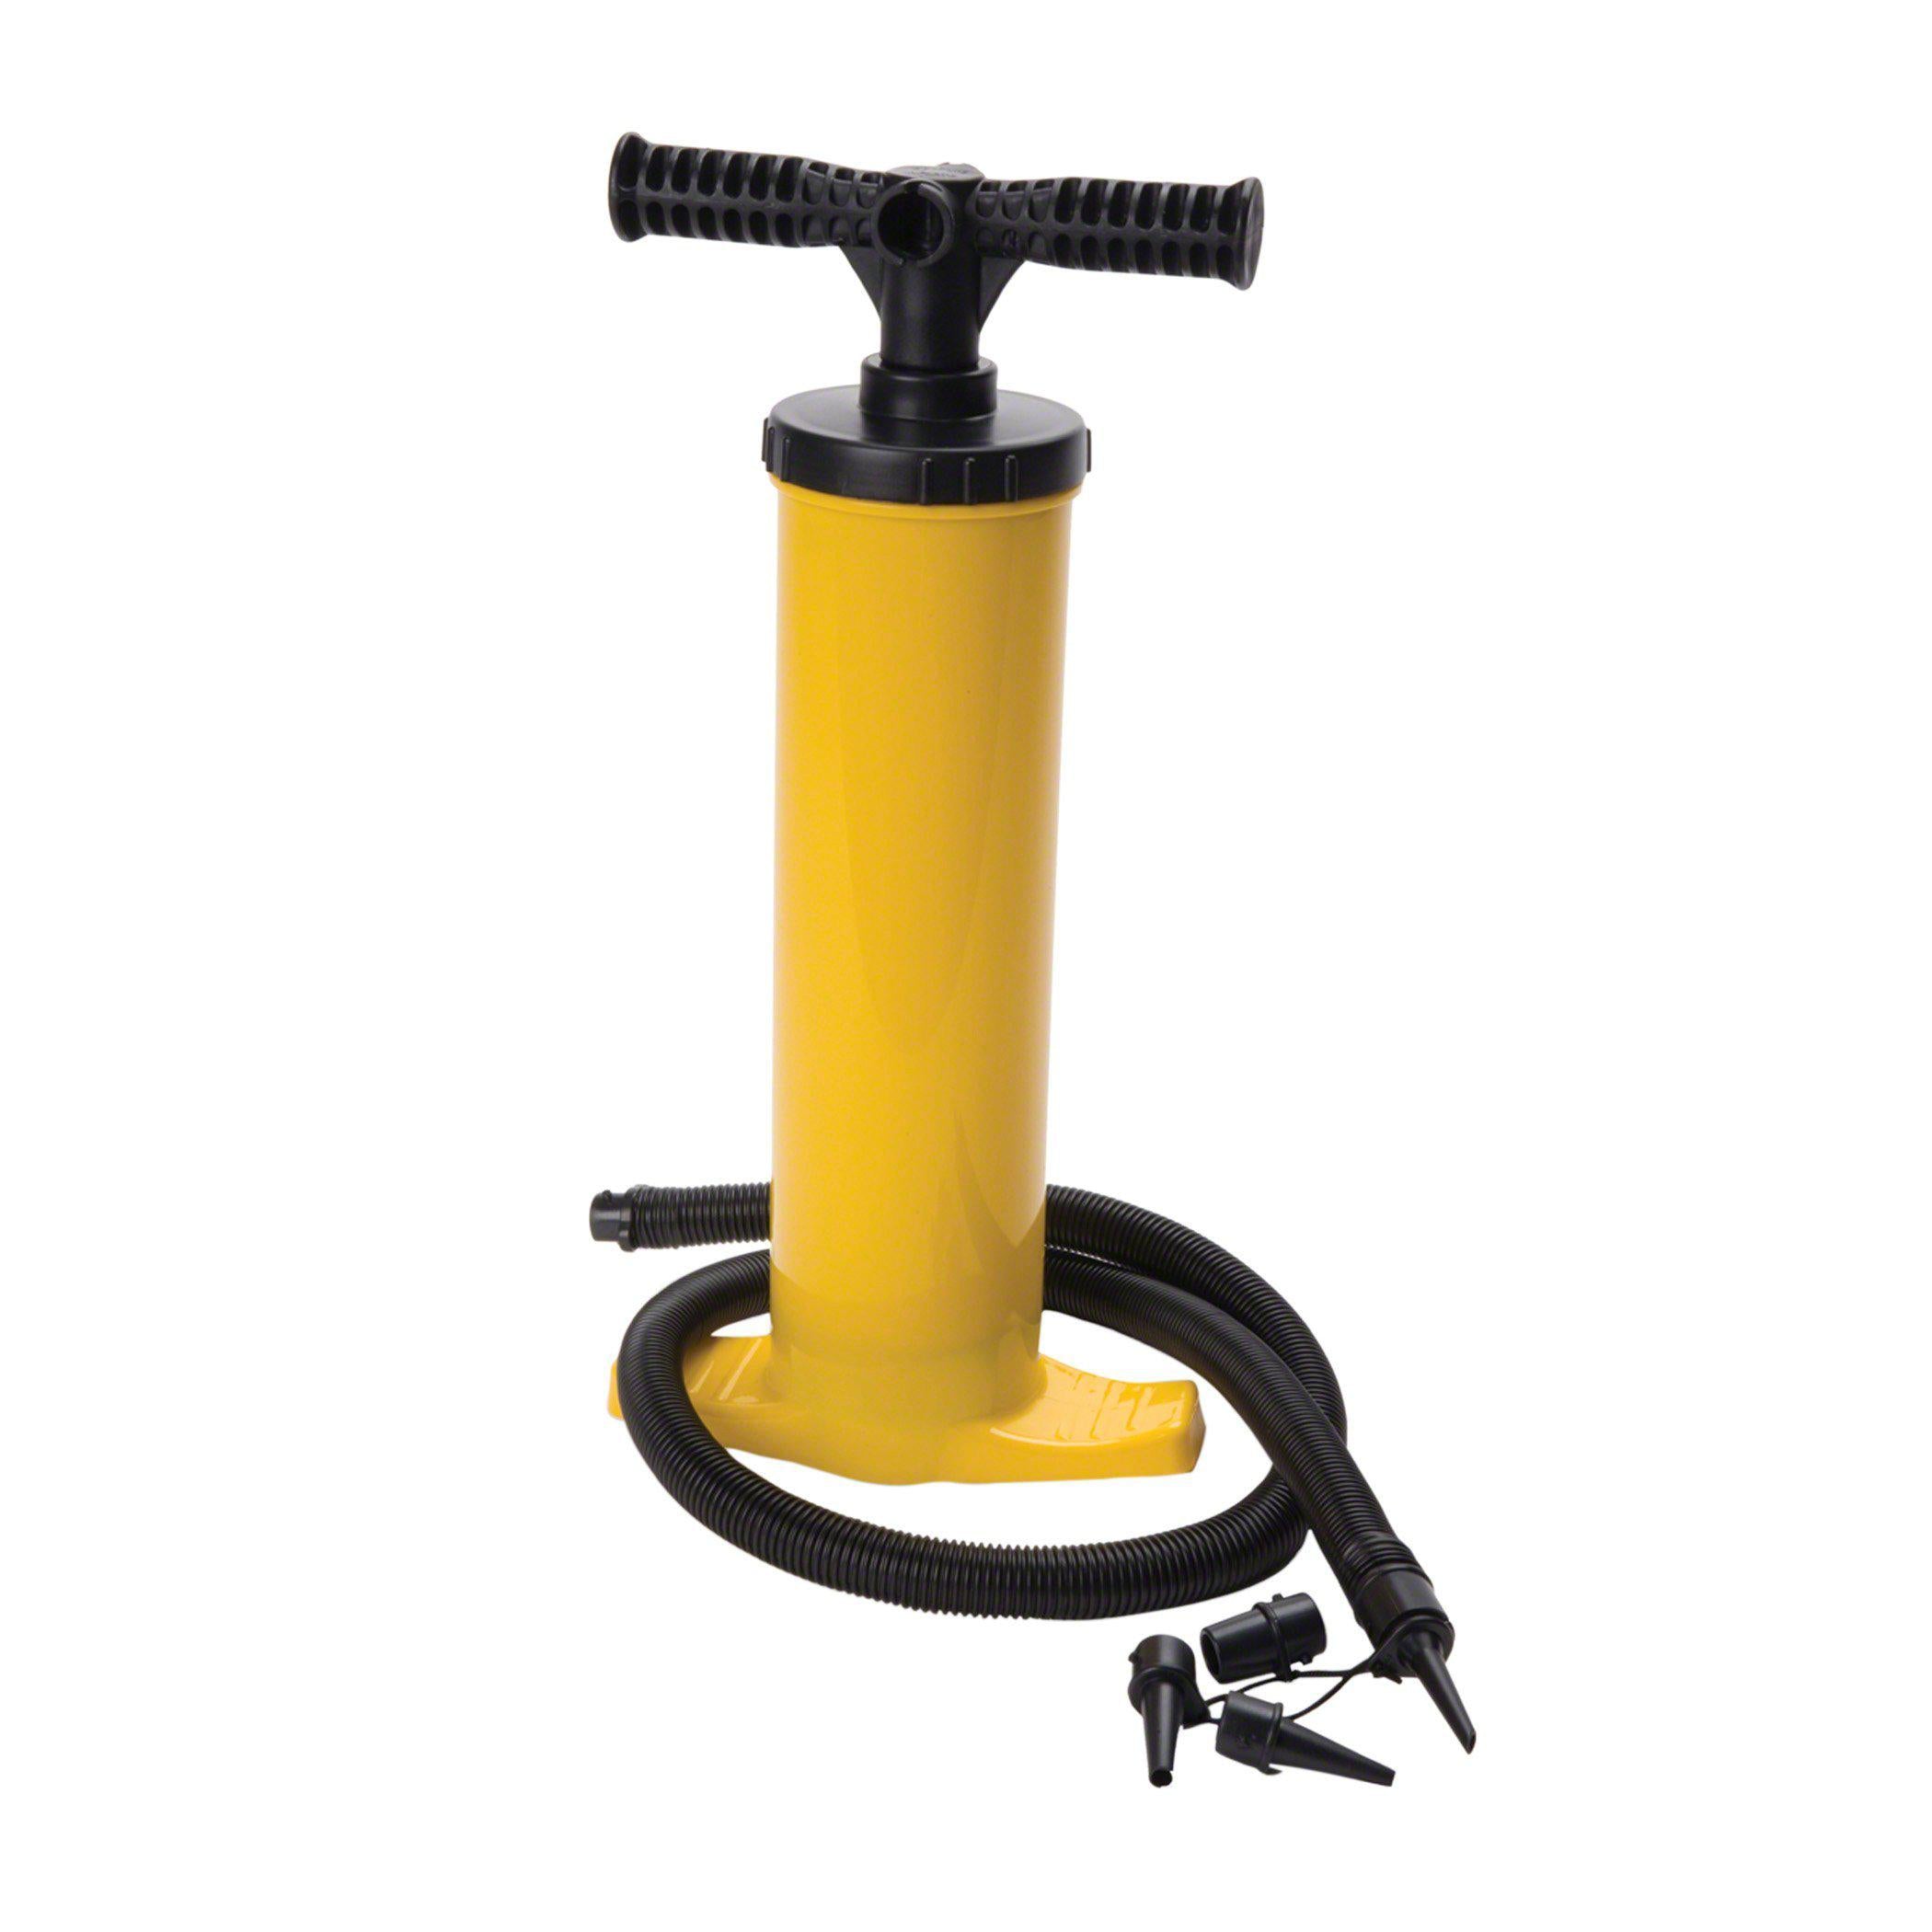 classic-accessories-inflatable-craft-hand-pump-the-gear-classic -accessories_large.jpg?v=1560910432